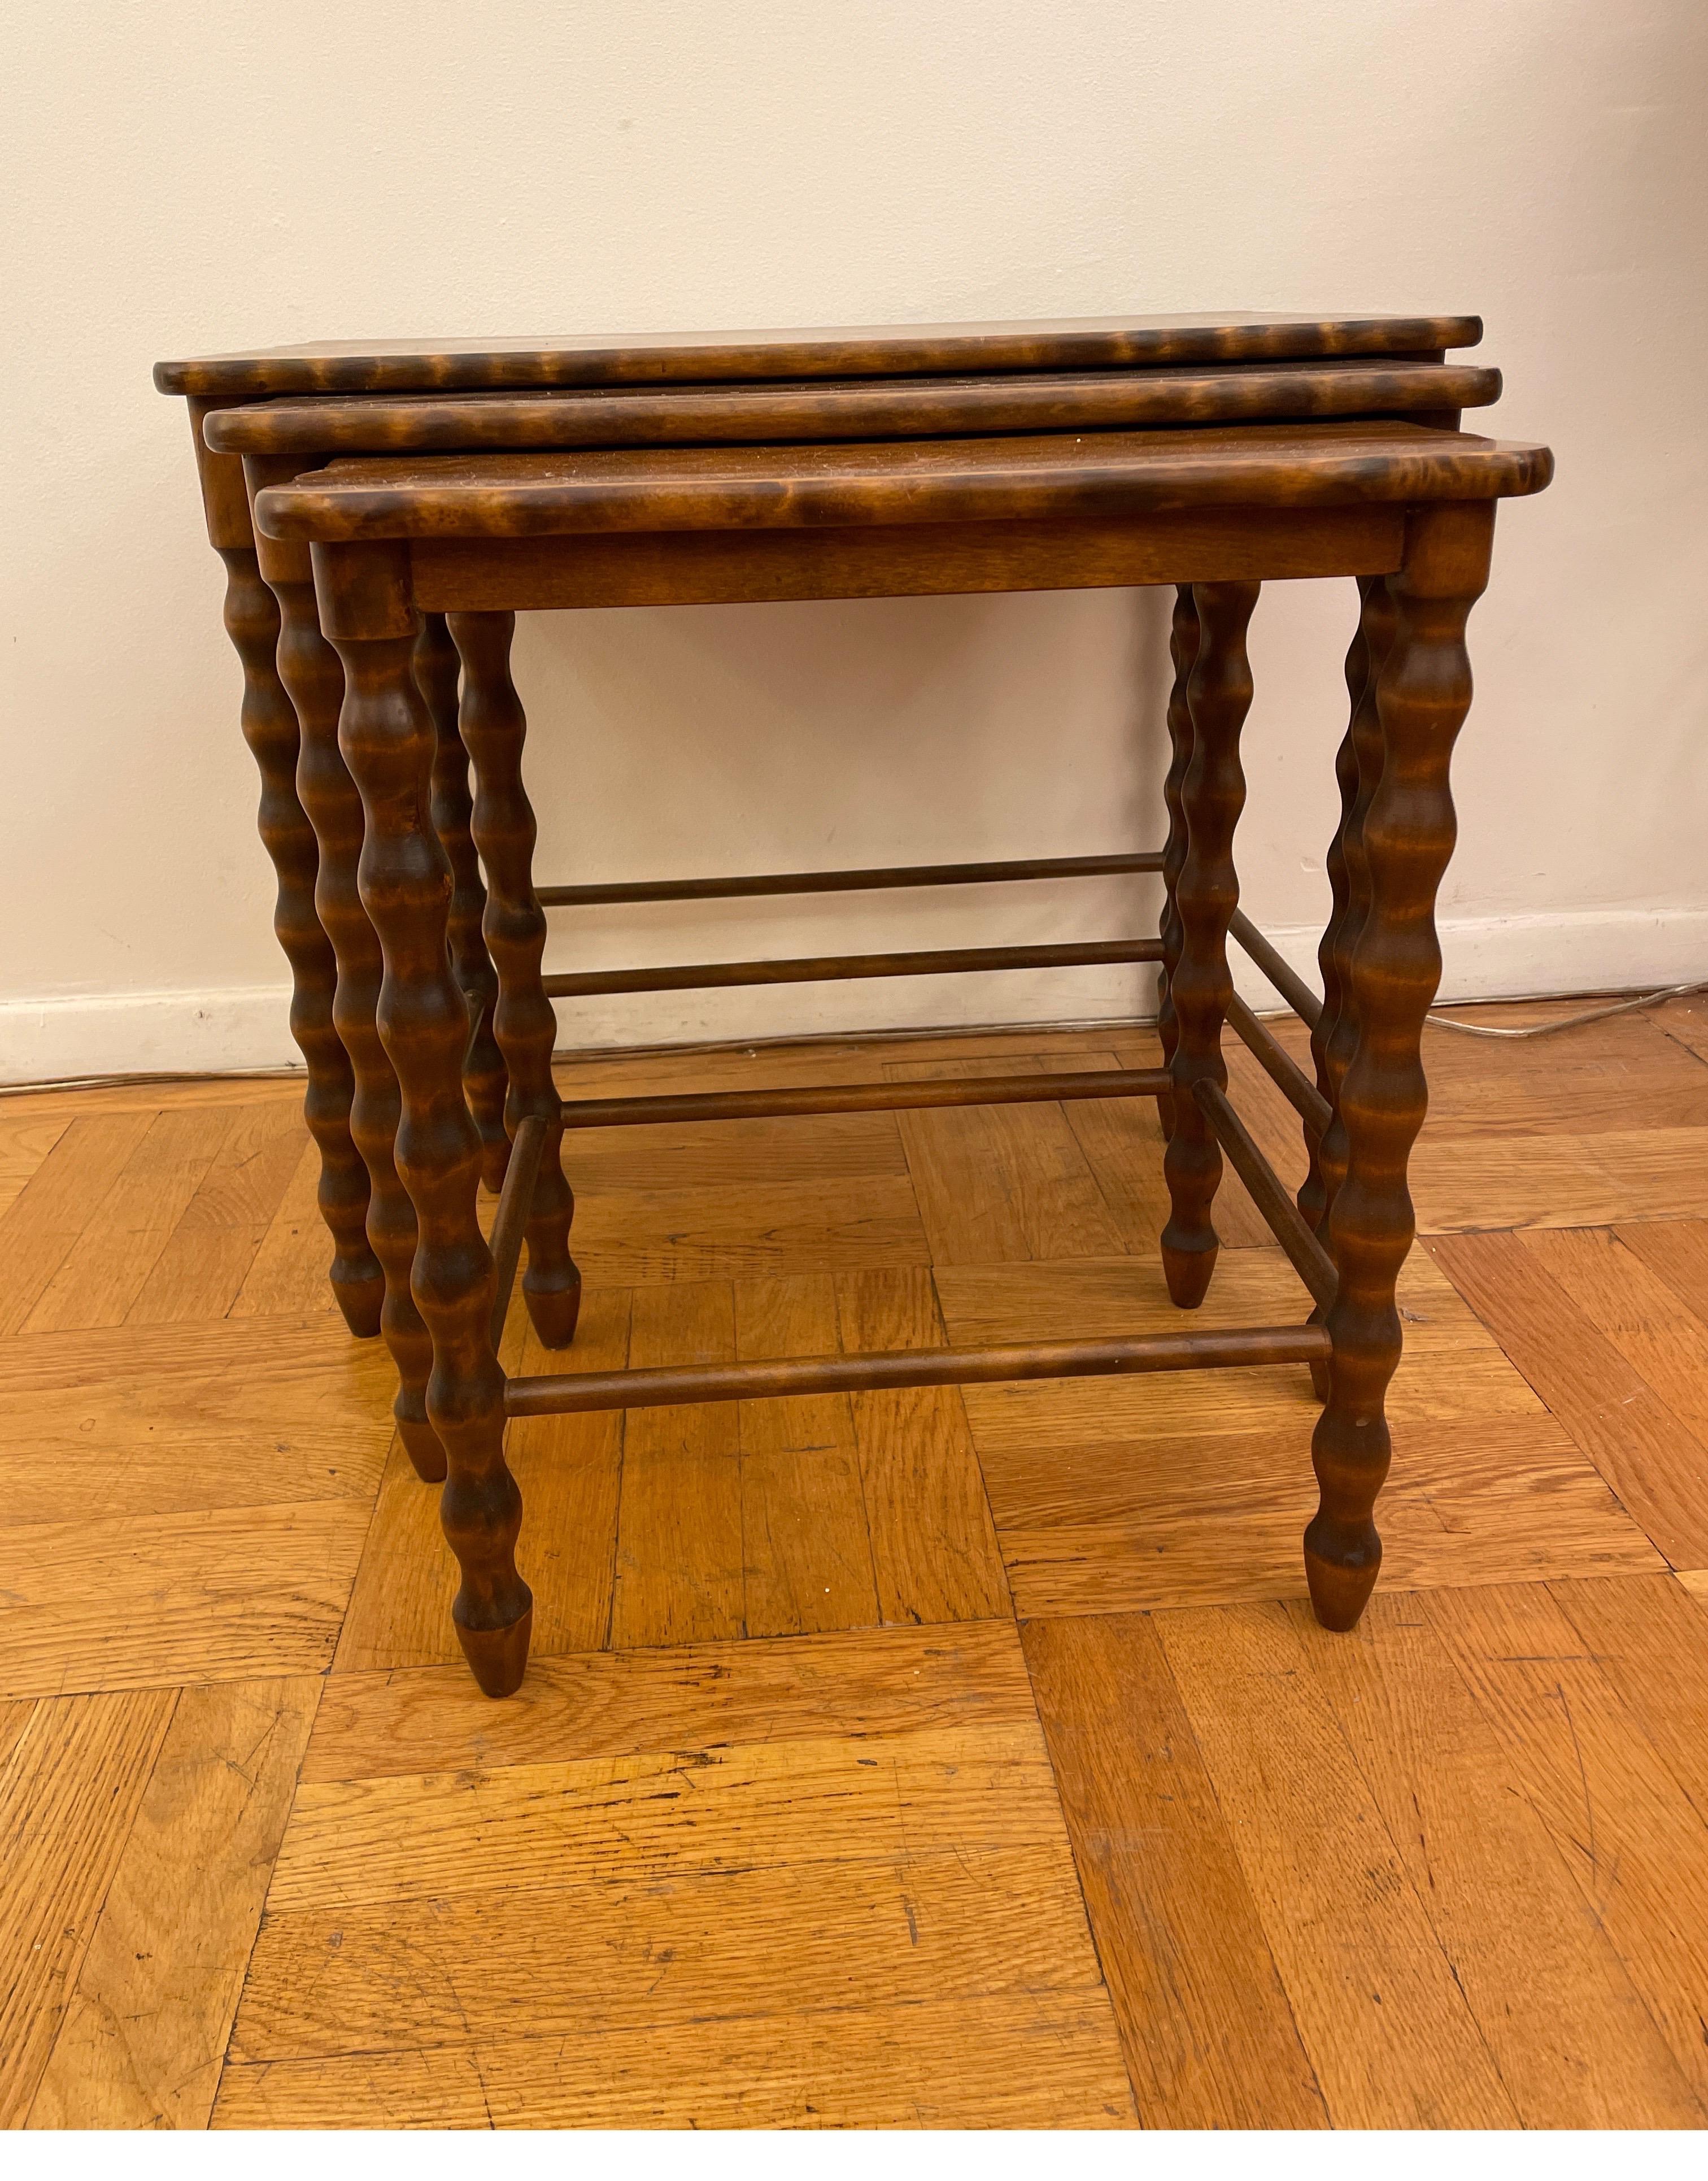 Lovely set of nesting tables crafted of solid walnut stained birch, with the highly sought after barley twist legs and bevelled edges. The two lower tables slide into grooves in the apron and 